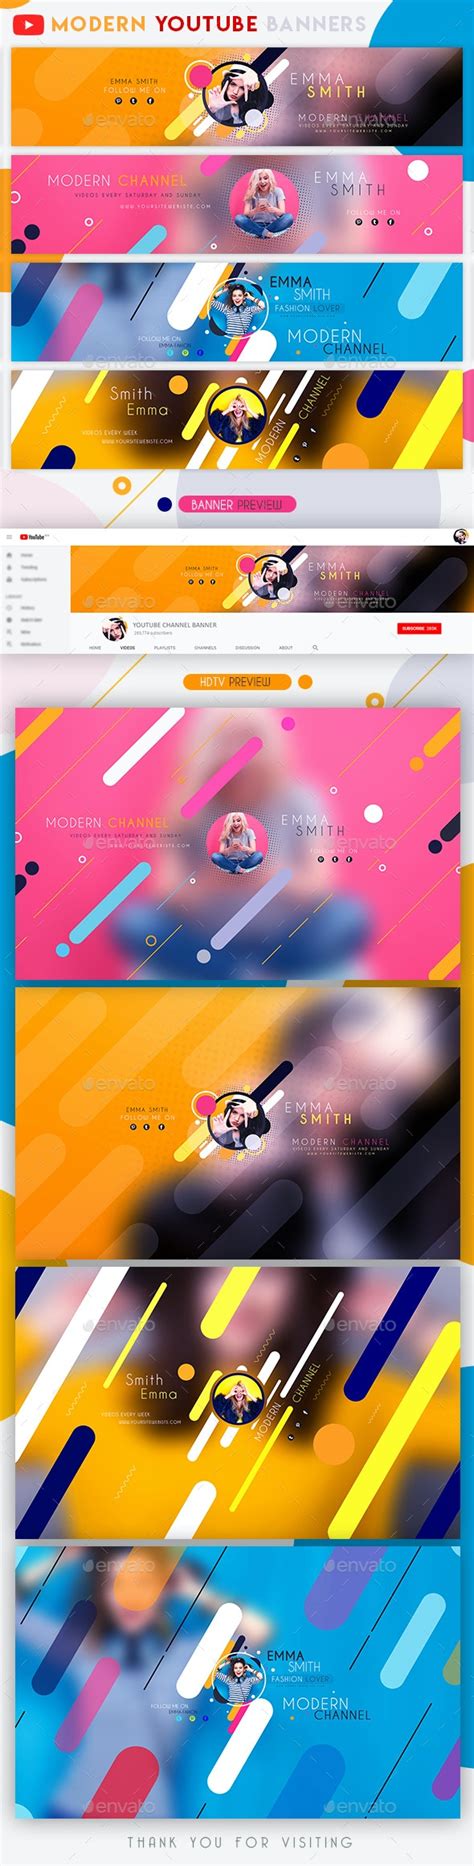 Modern Youtube Banners By Blildesign Graphicriver